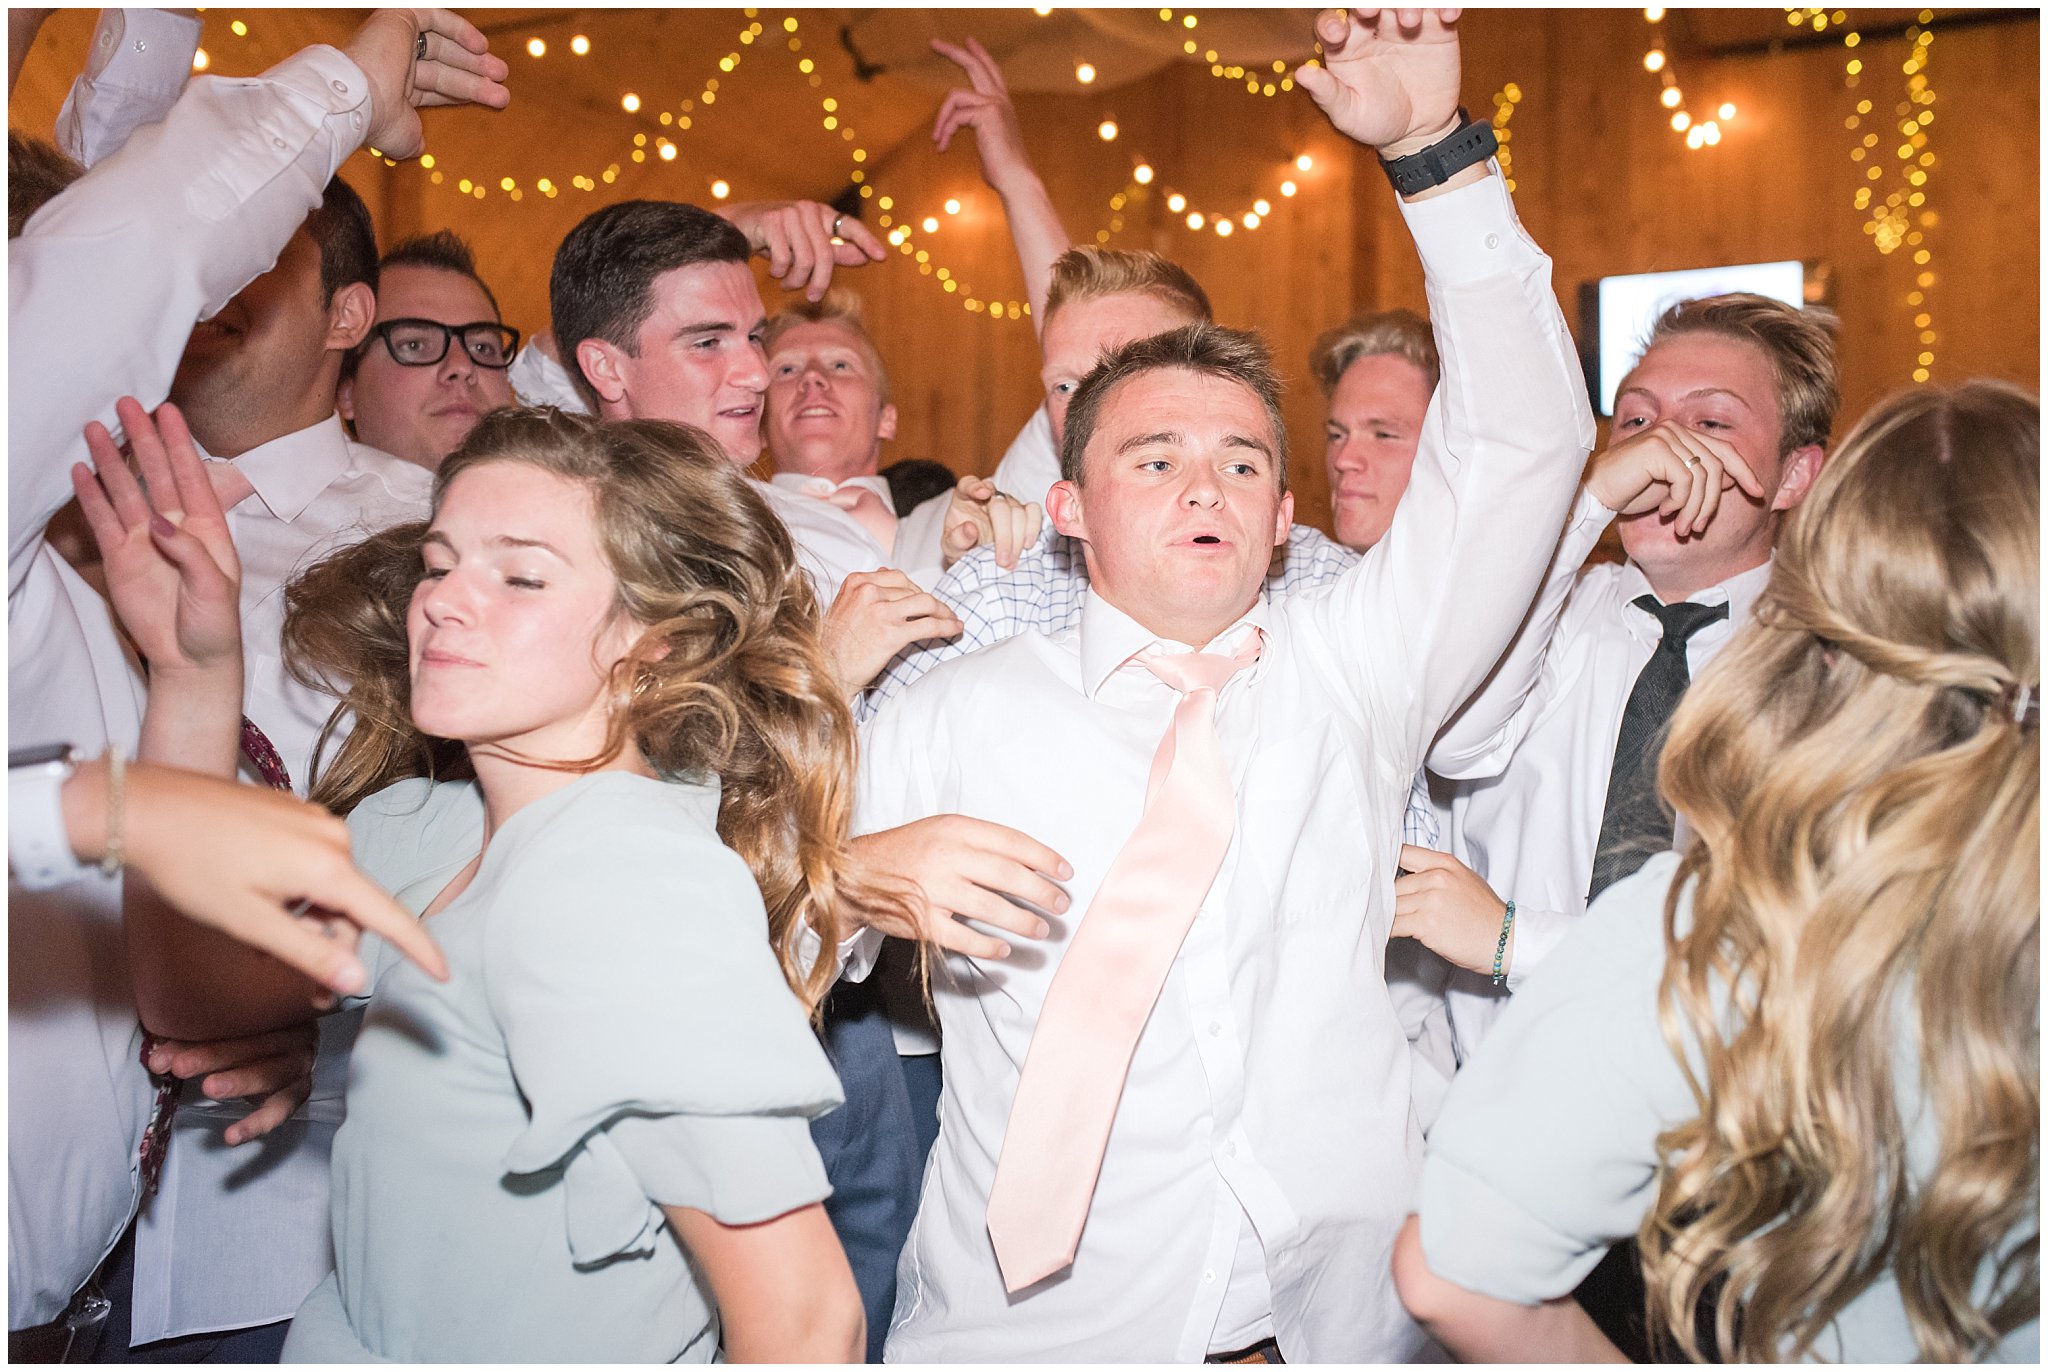 Party dancing at reception | Oak Hills Reception and Events Center | Jessie and Dallin Photography